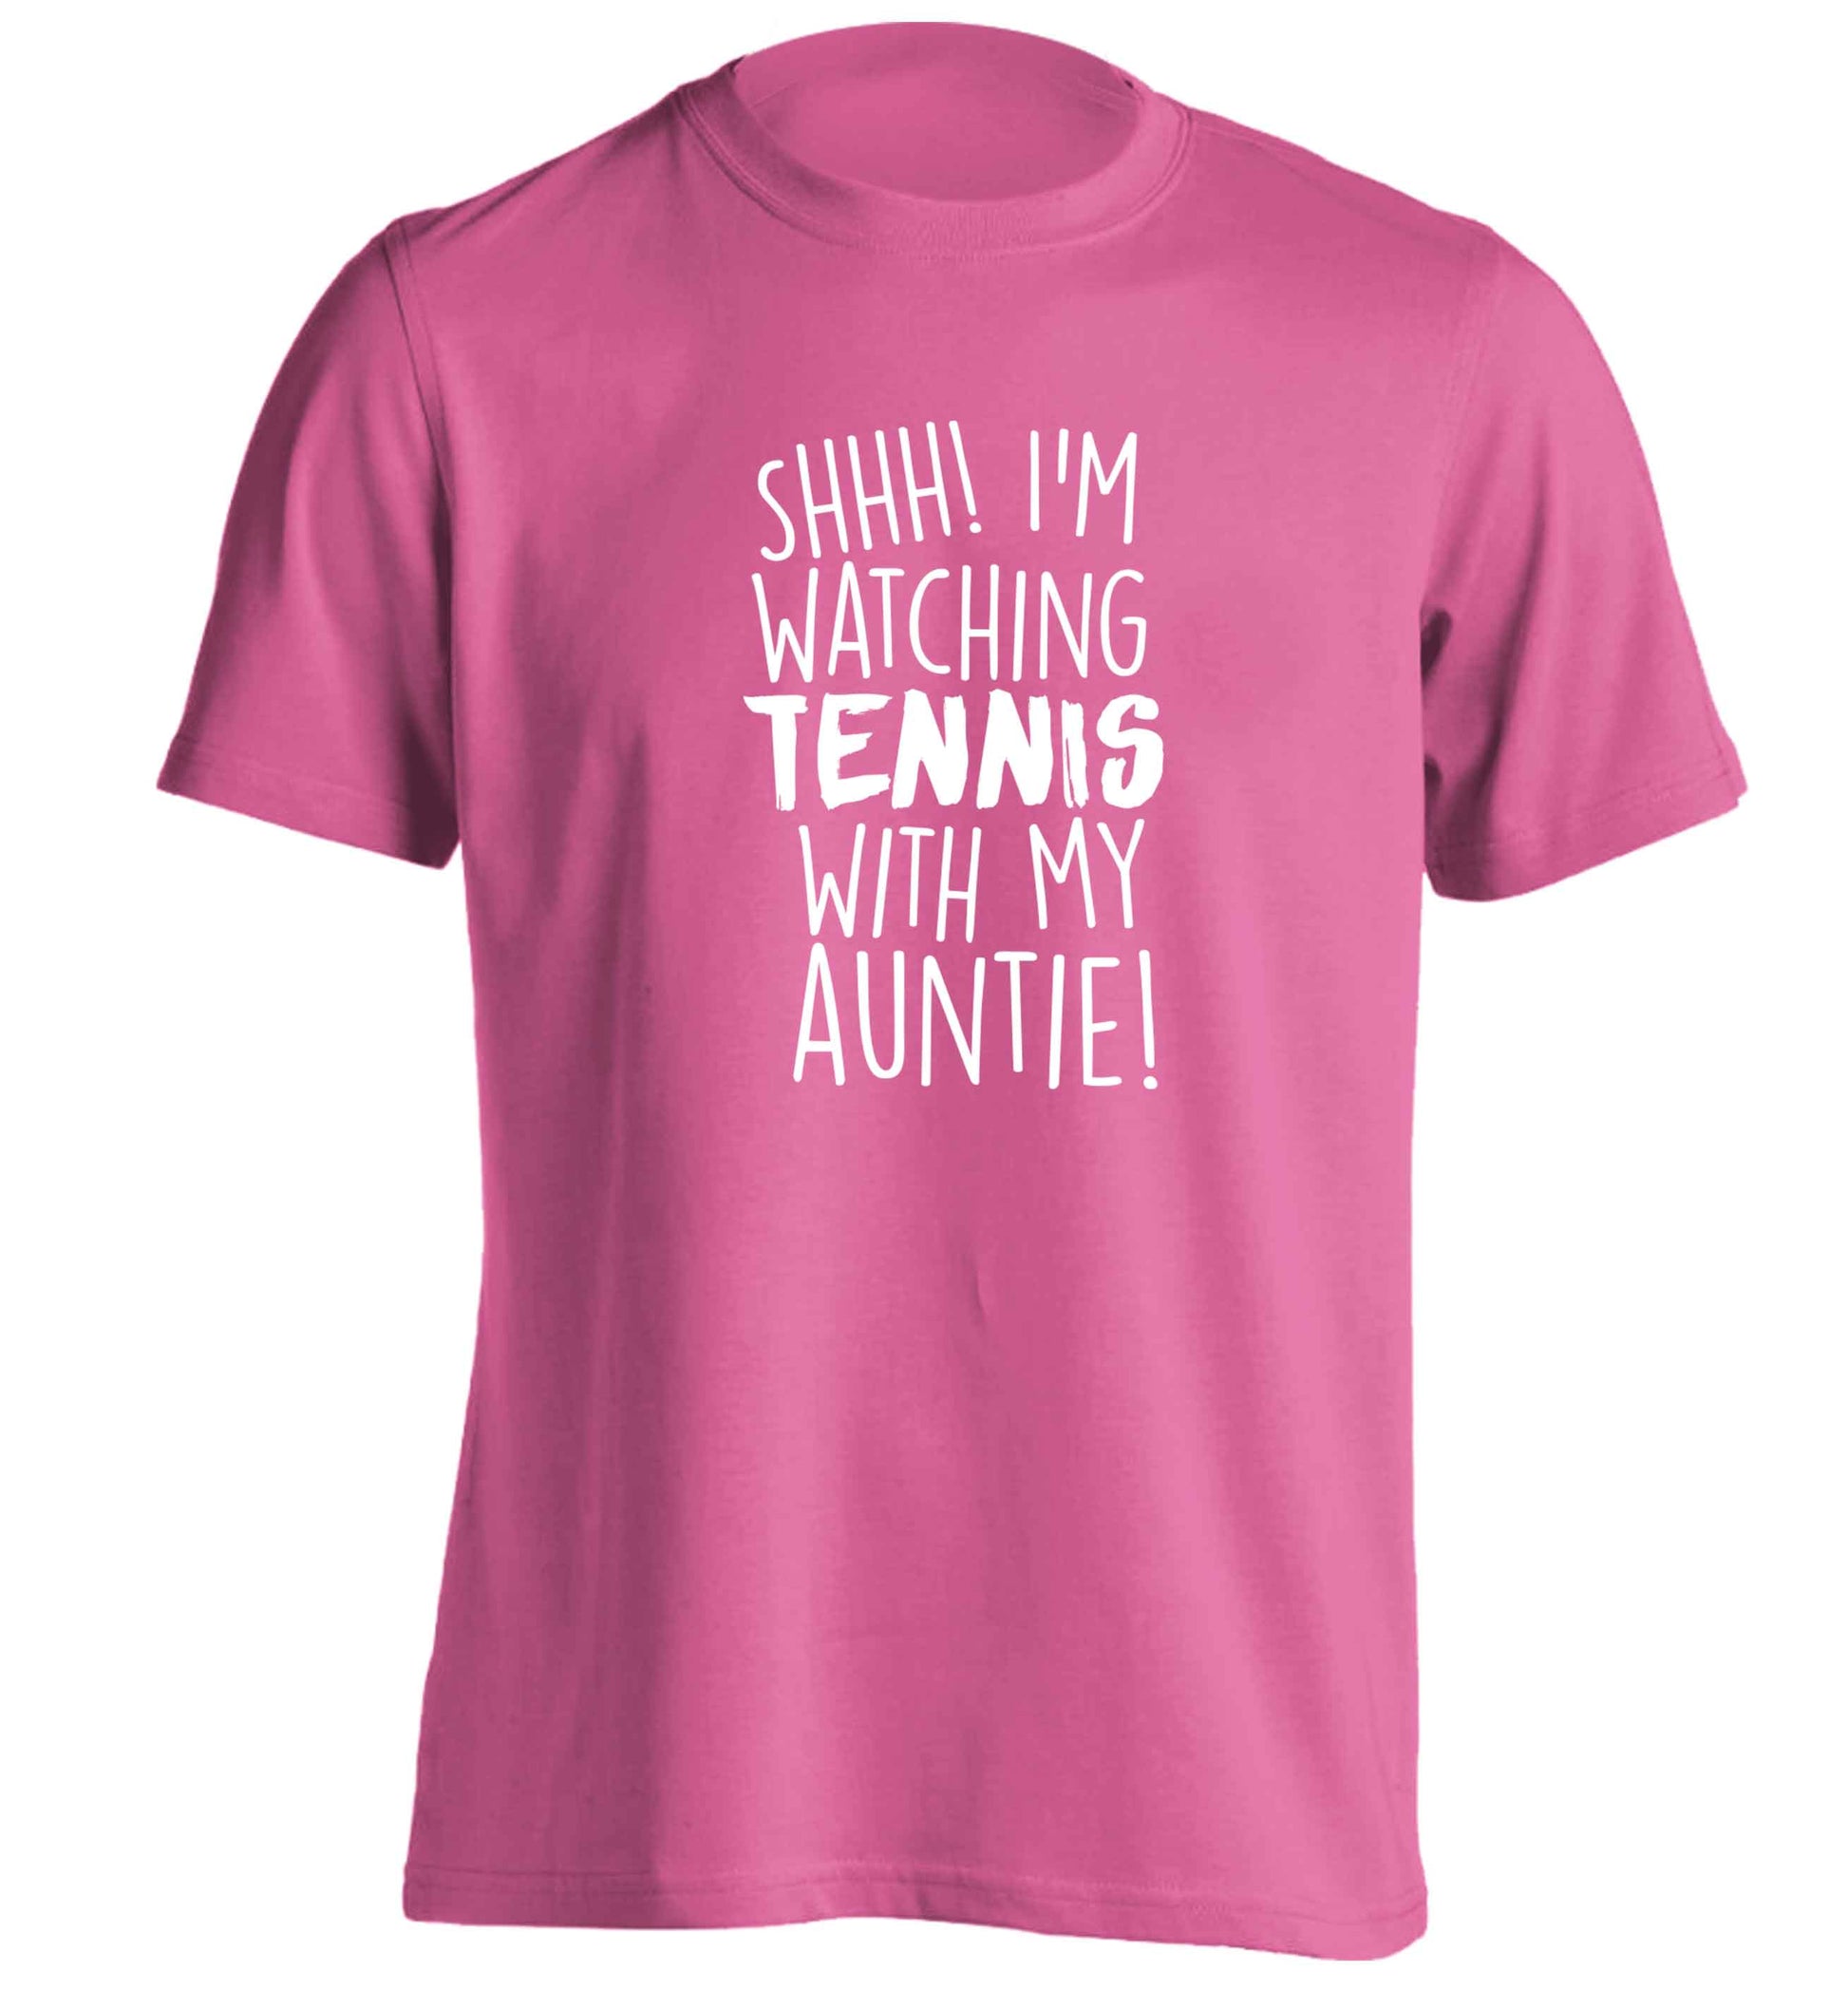 Shh! I'm watching tennis with my auntie! adults unisex pink Tshirt 2XL